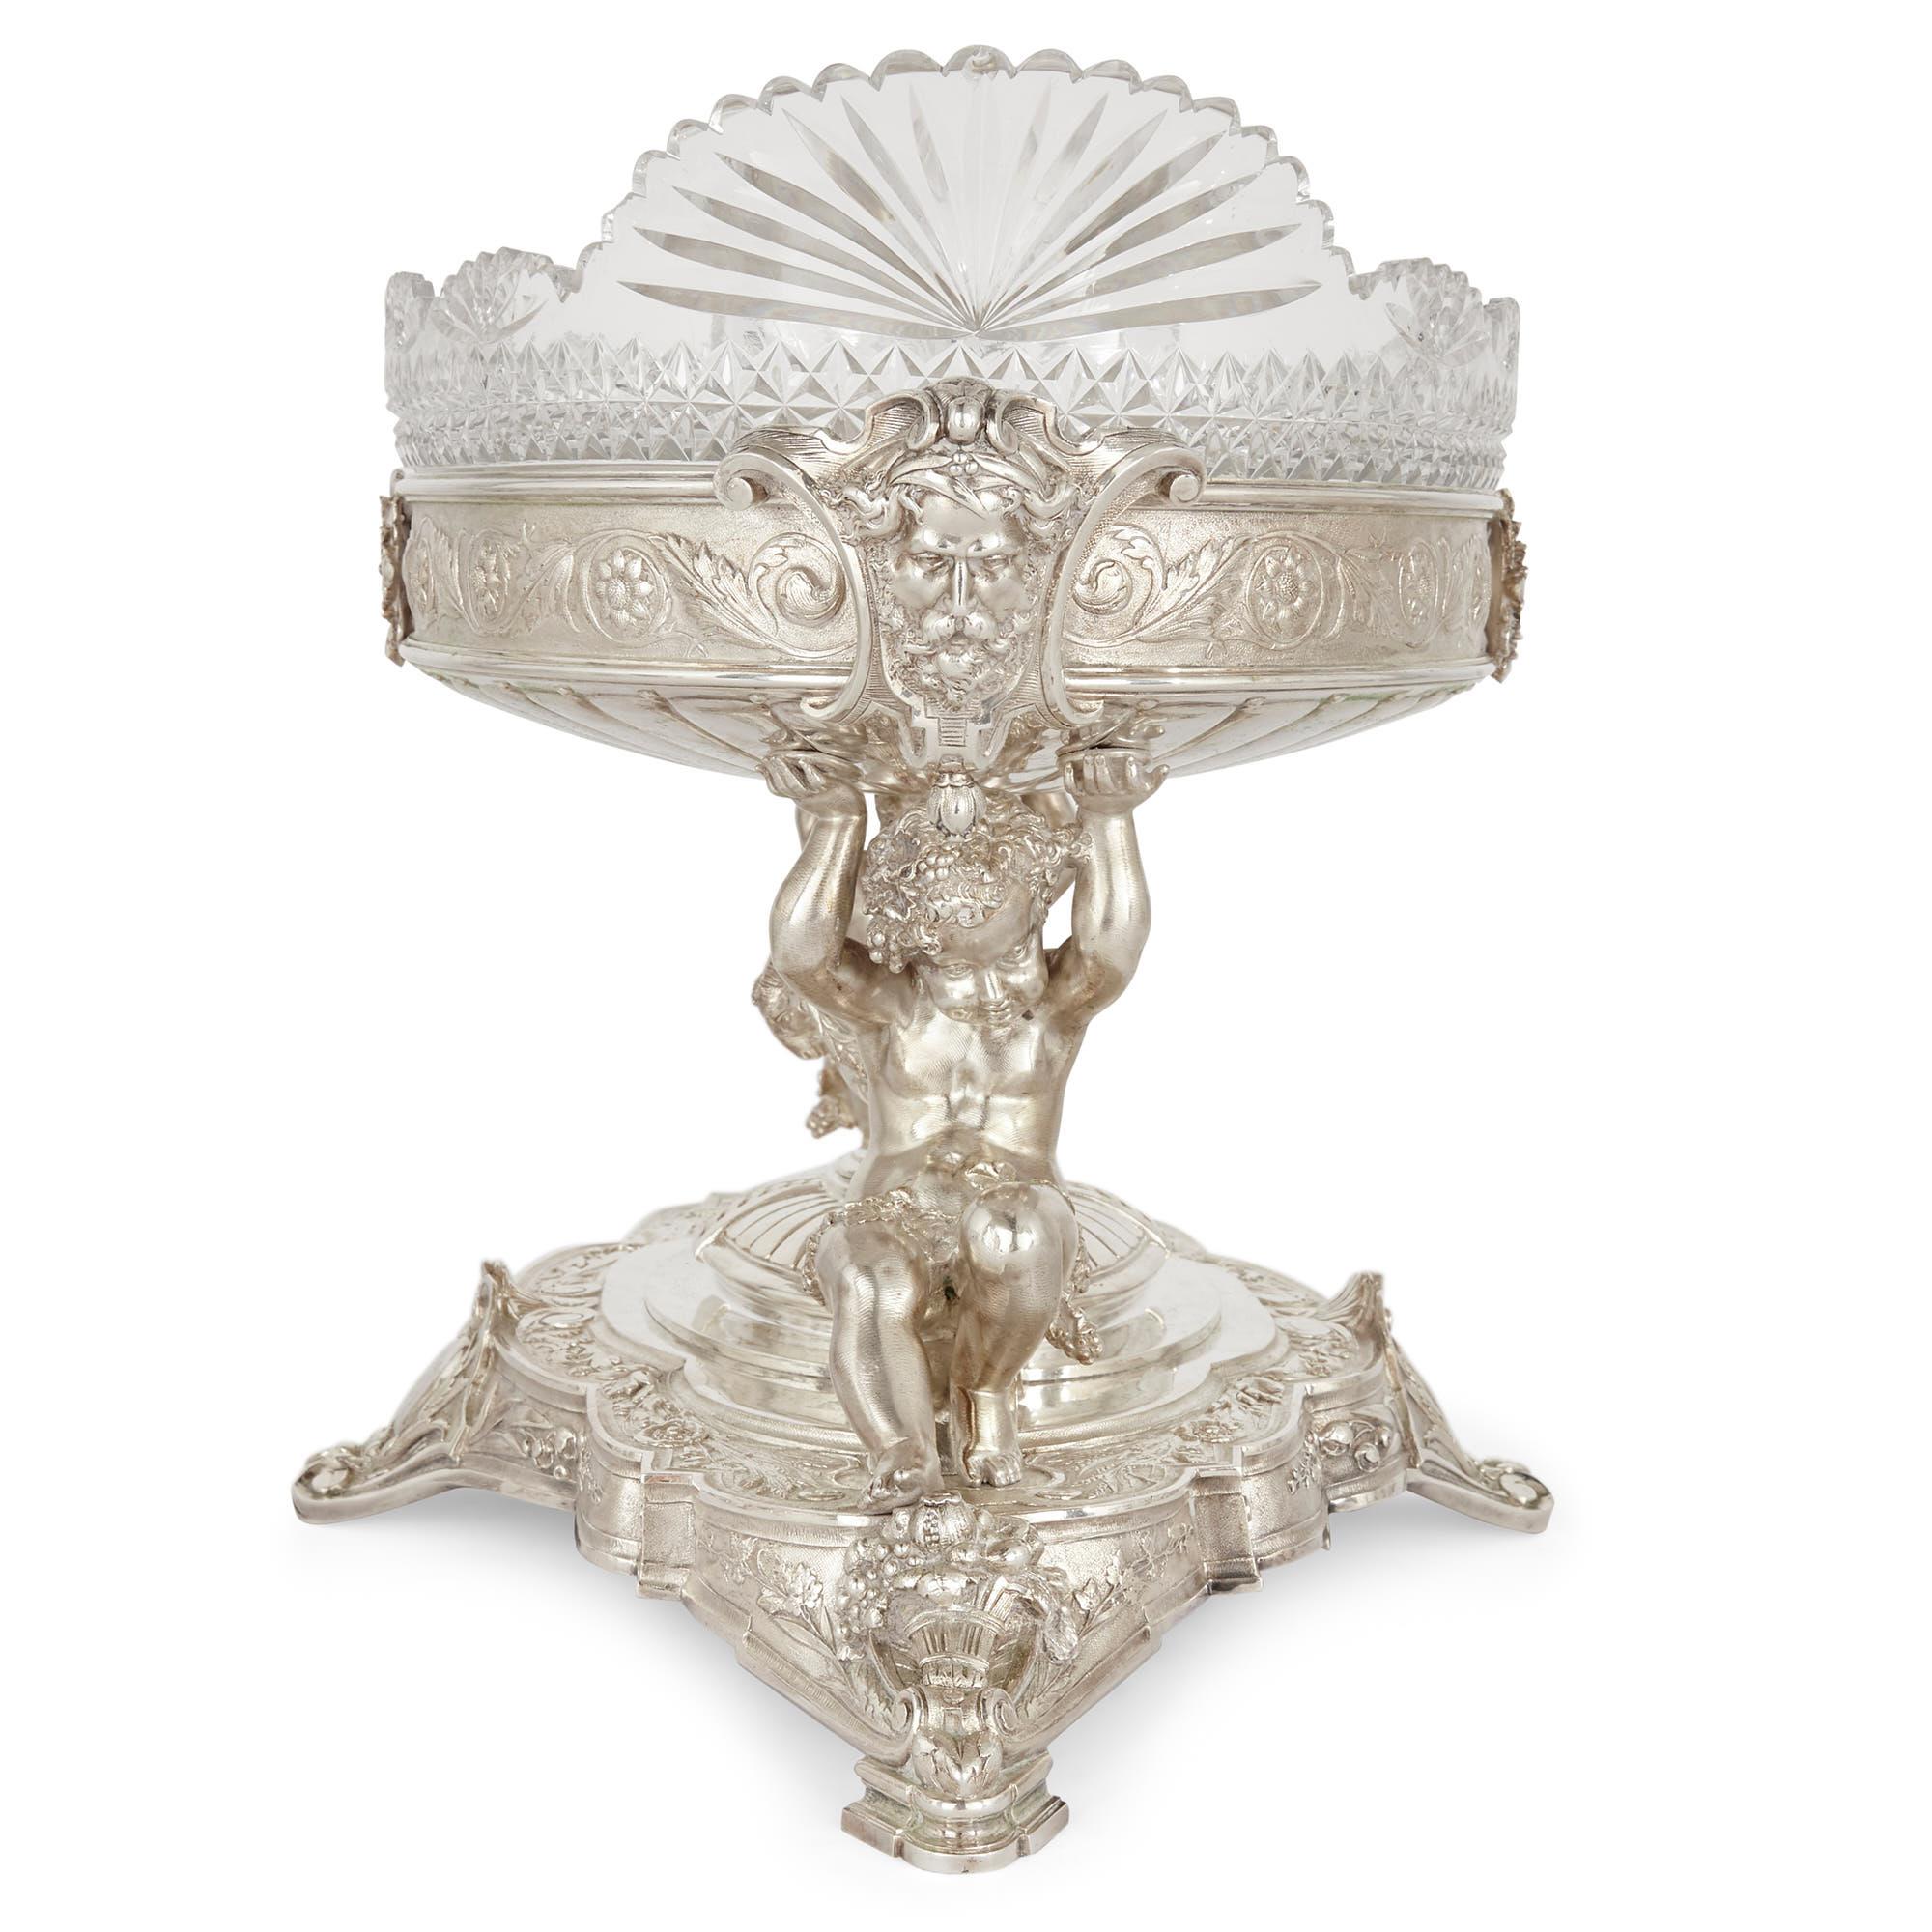 Victorian Extensive Silver-Plate Table Service by English Firm Elkington For Sale